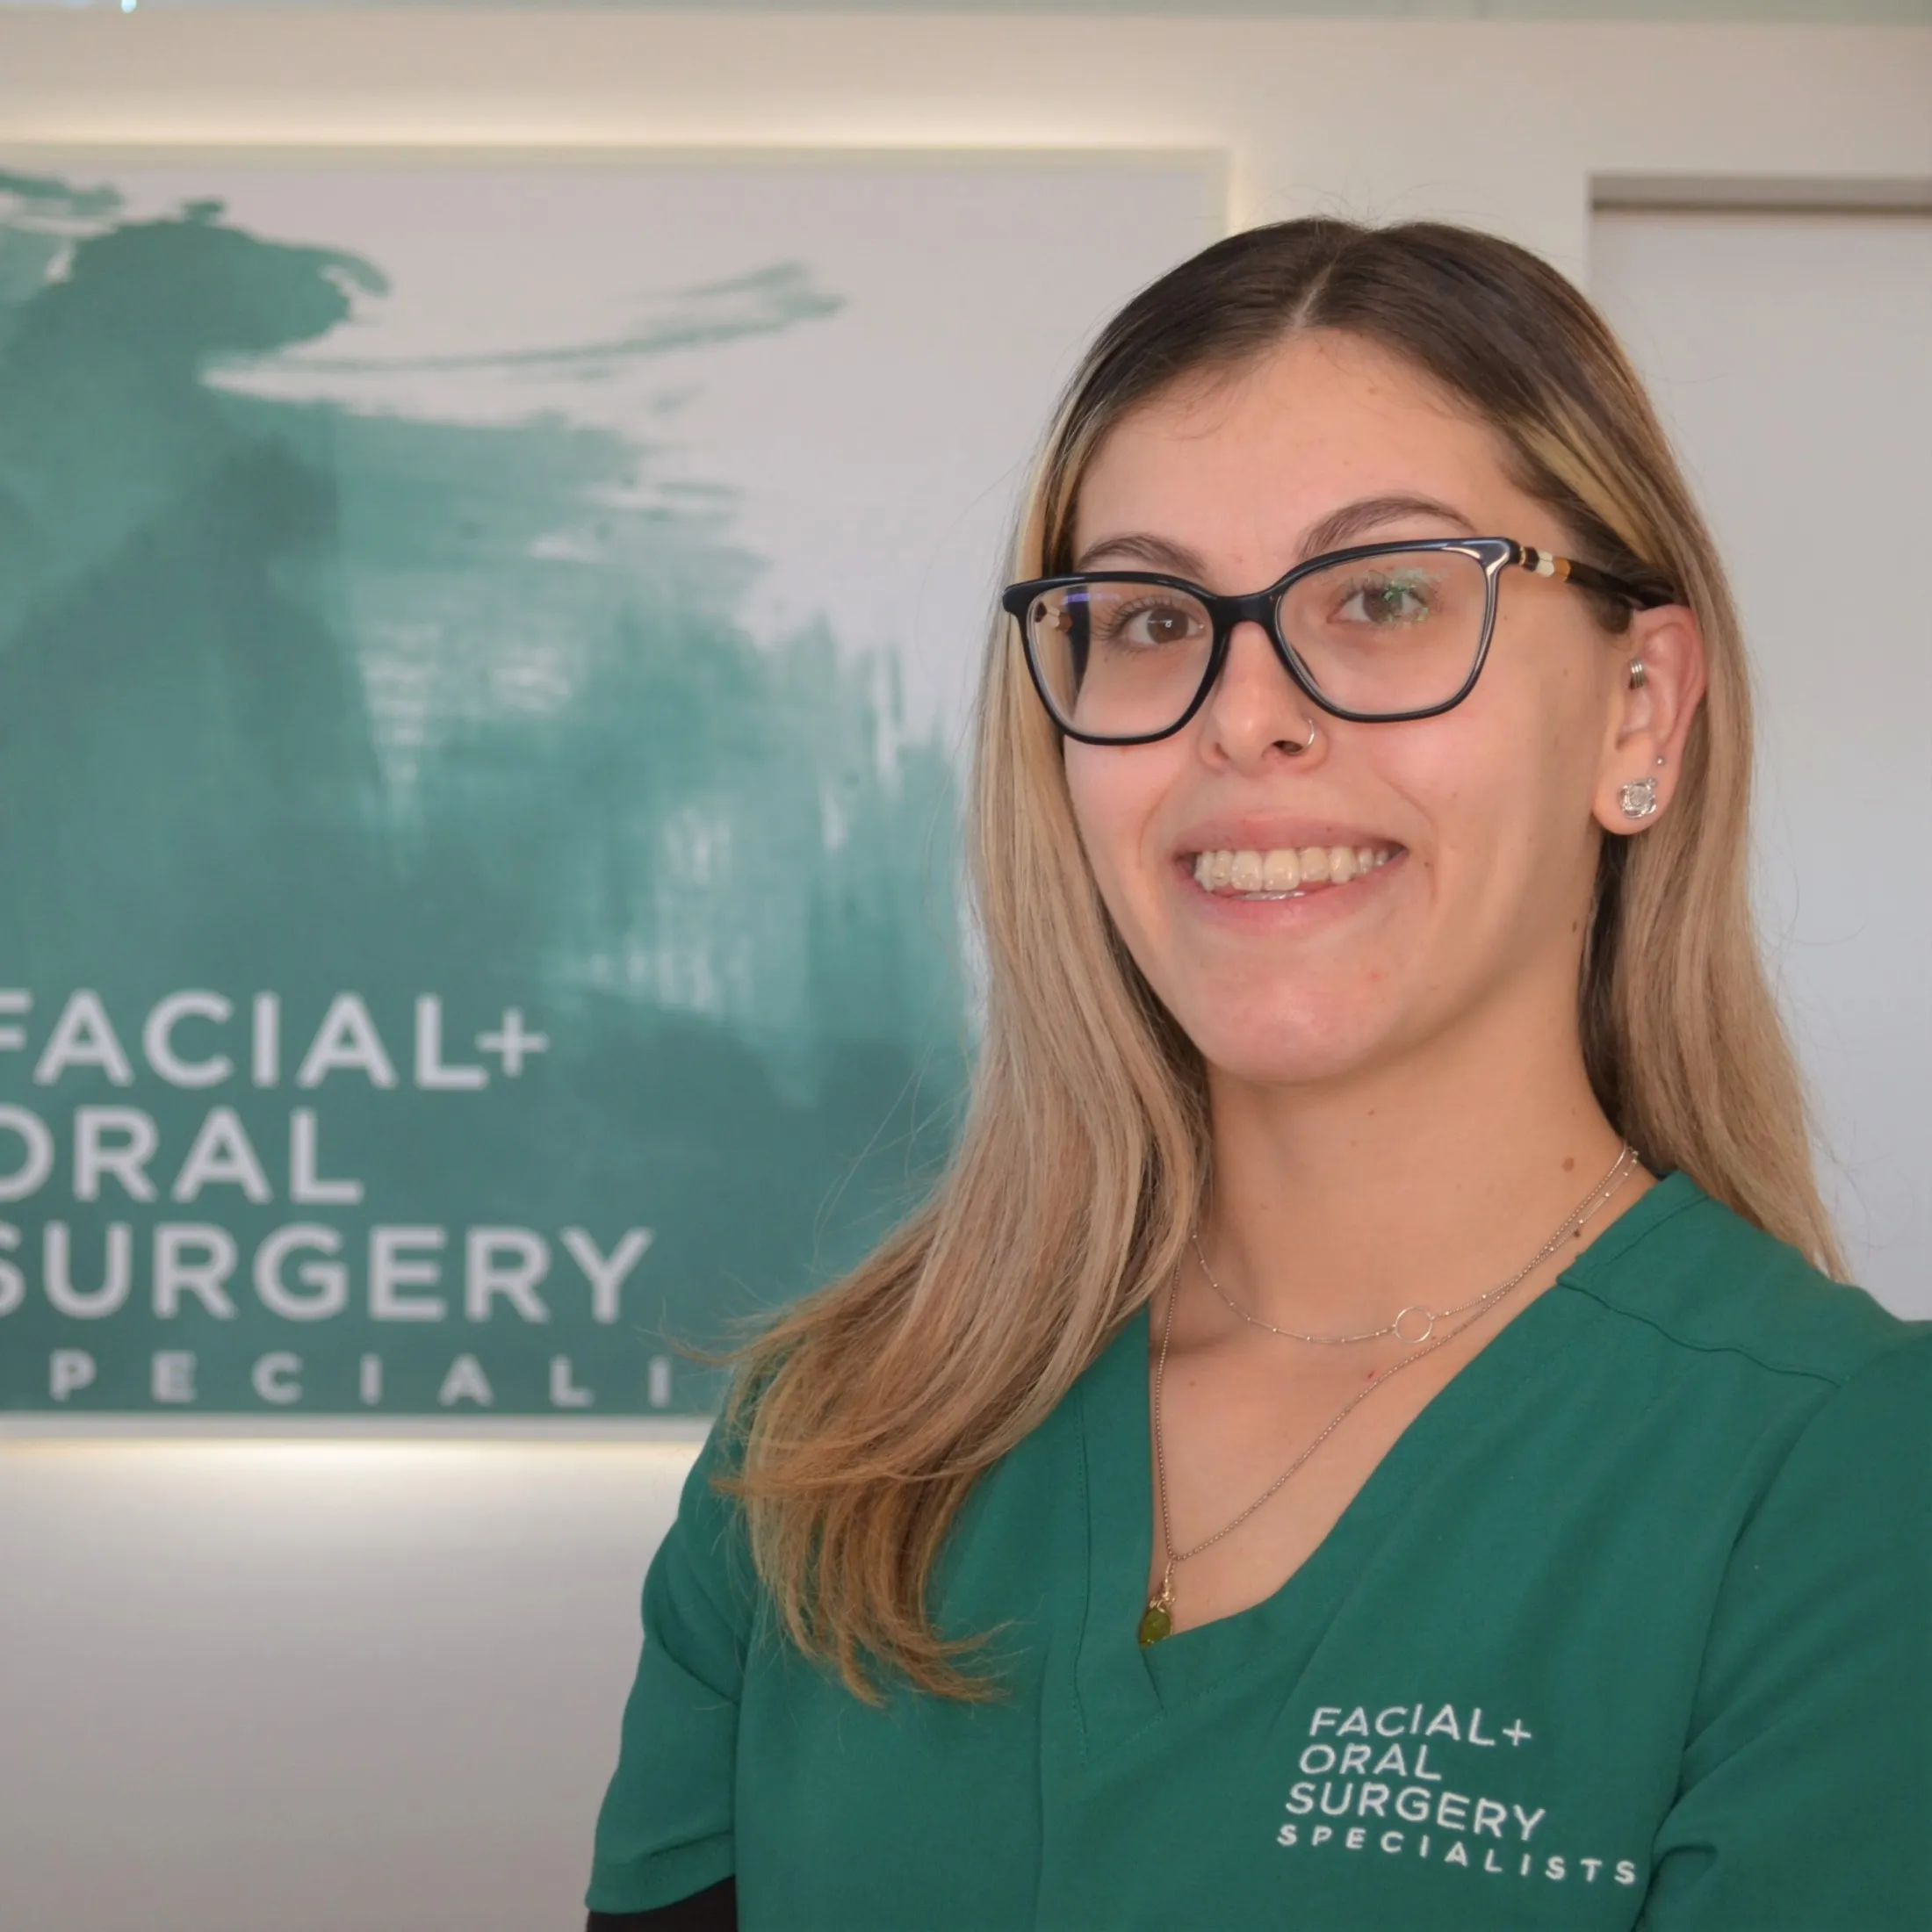 KIM  Surgical Assistant at Facial and Oral Surgery Specialists